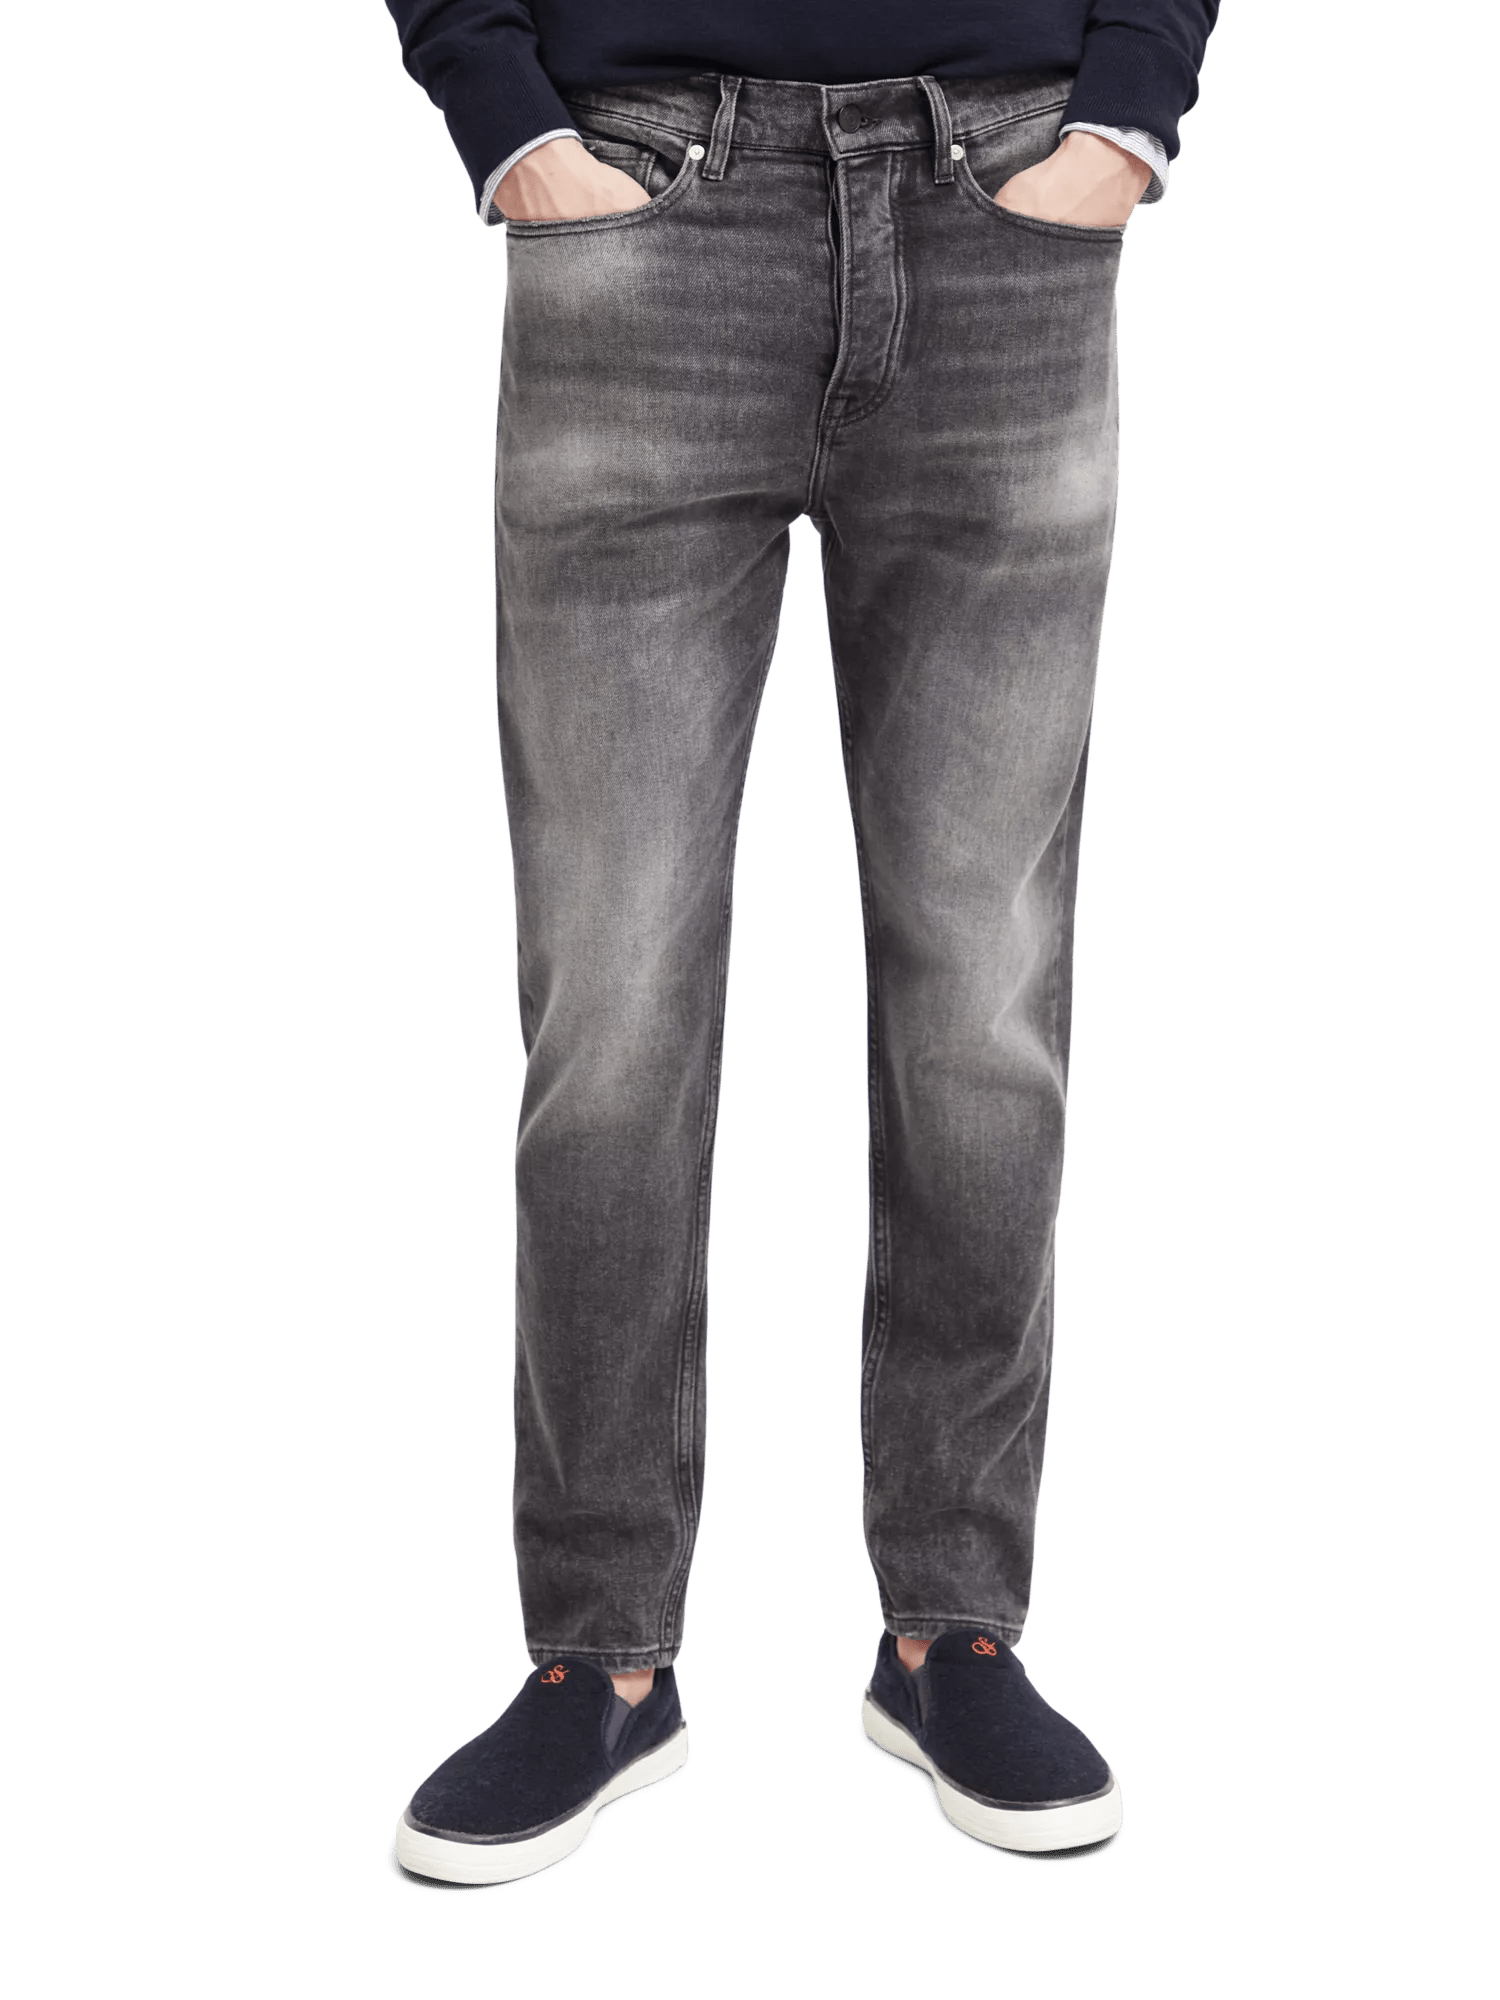 Scotch & Soda The Drop regular tapered jeans MDL-CRP